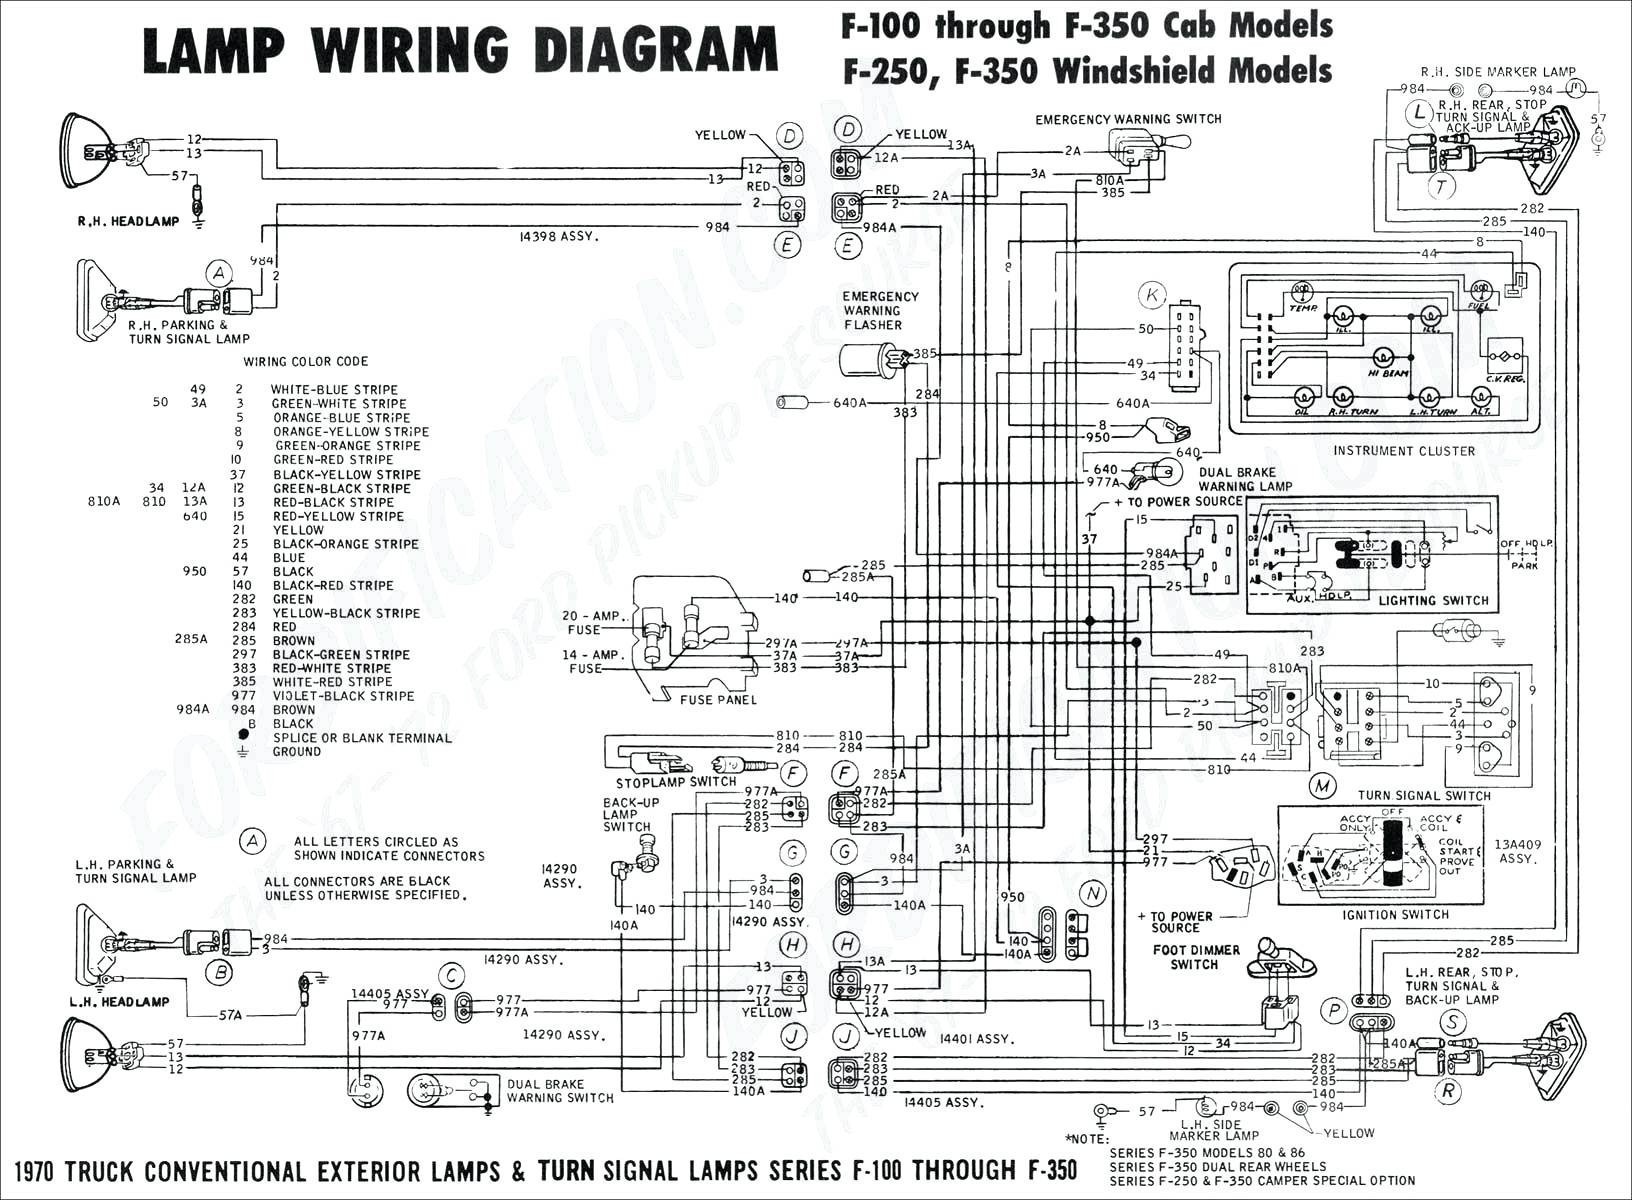 Wiring Diagram Easy Simple Routing Starter Relay Wiring Diagram Simple Wiring Schematics